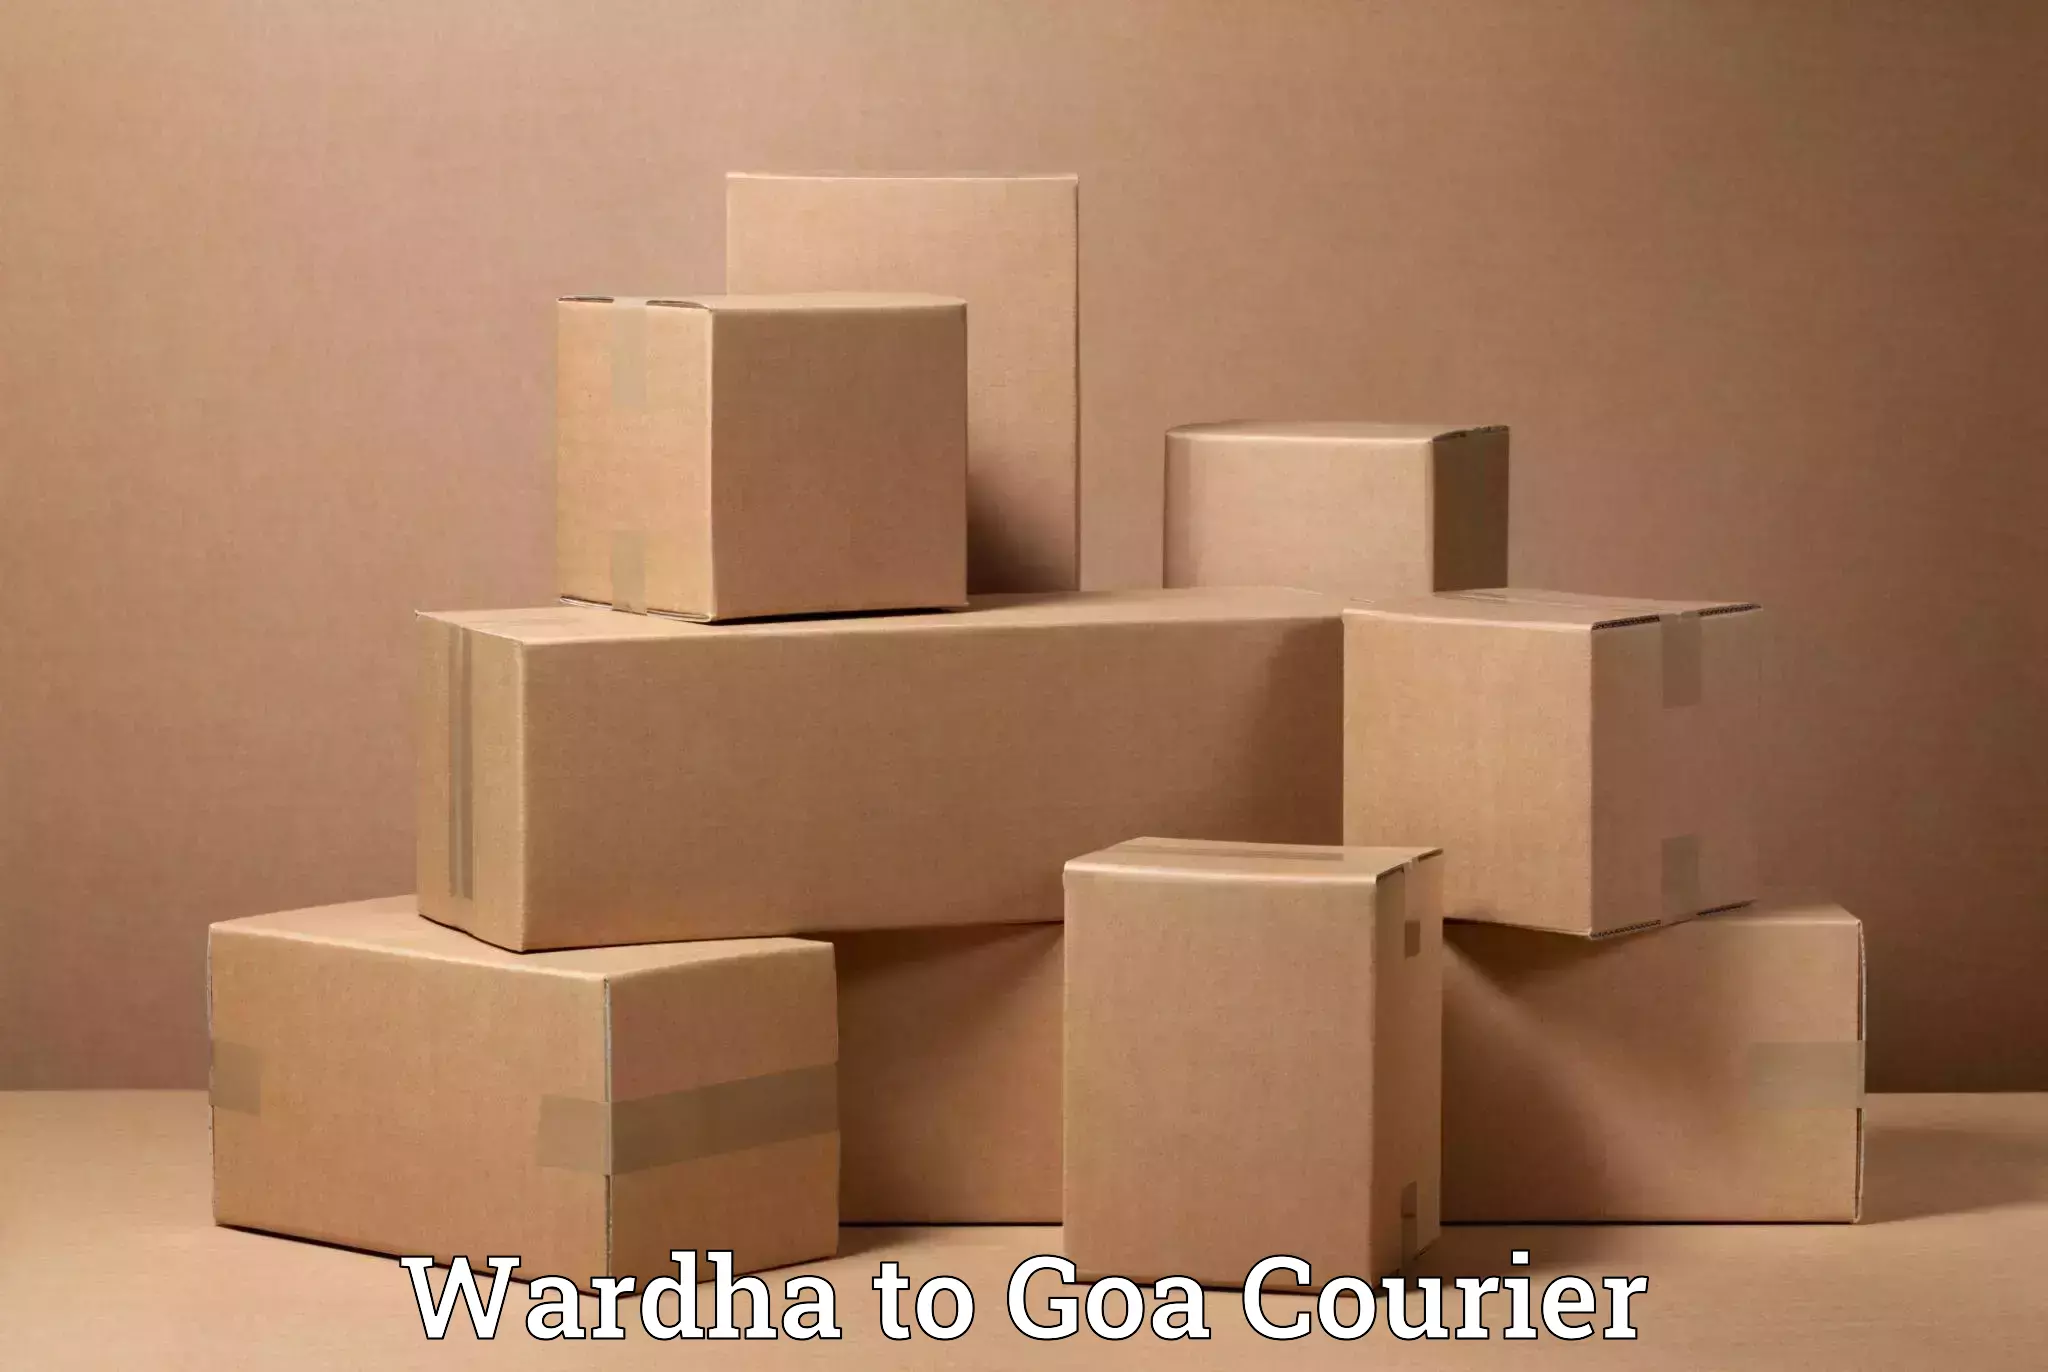 Trusted relocation experts Wardha to Bicholim